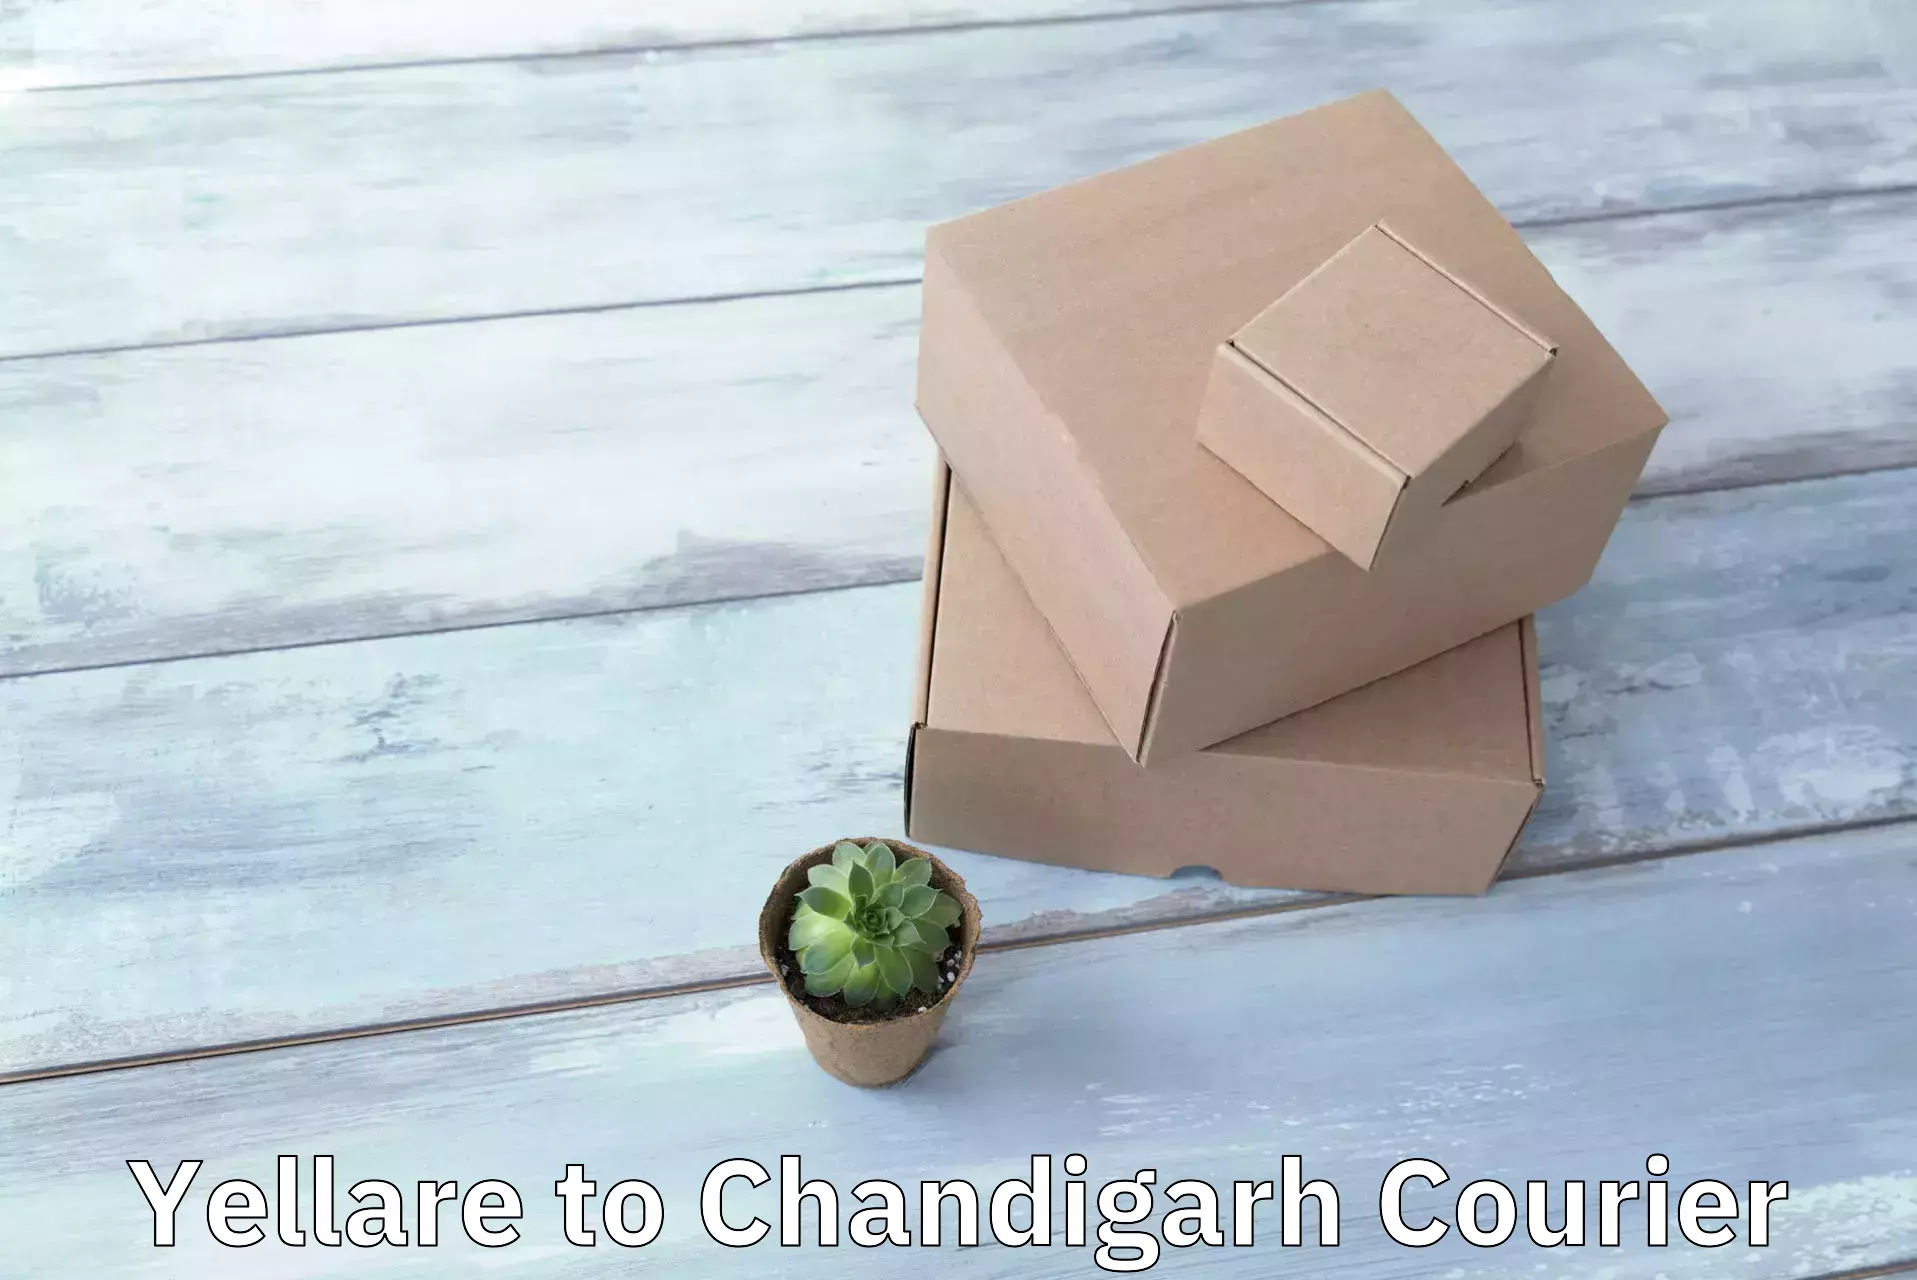 Affordable parcel service Yellare to Chandigarh